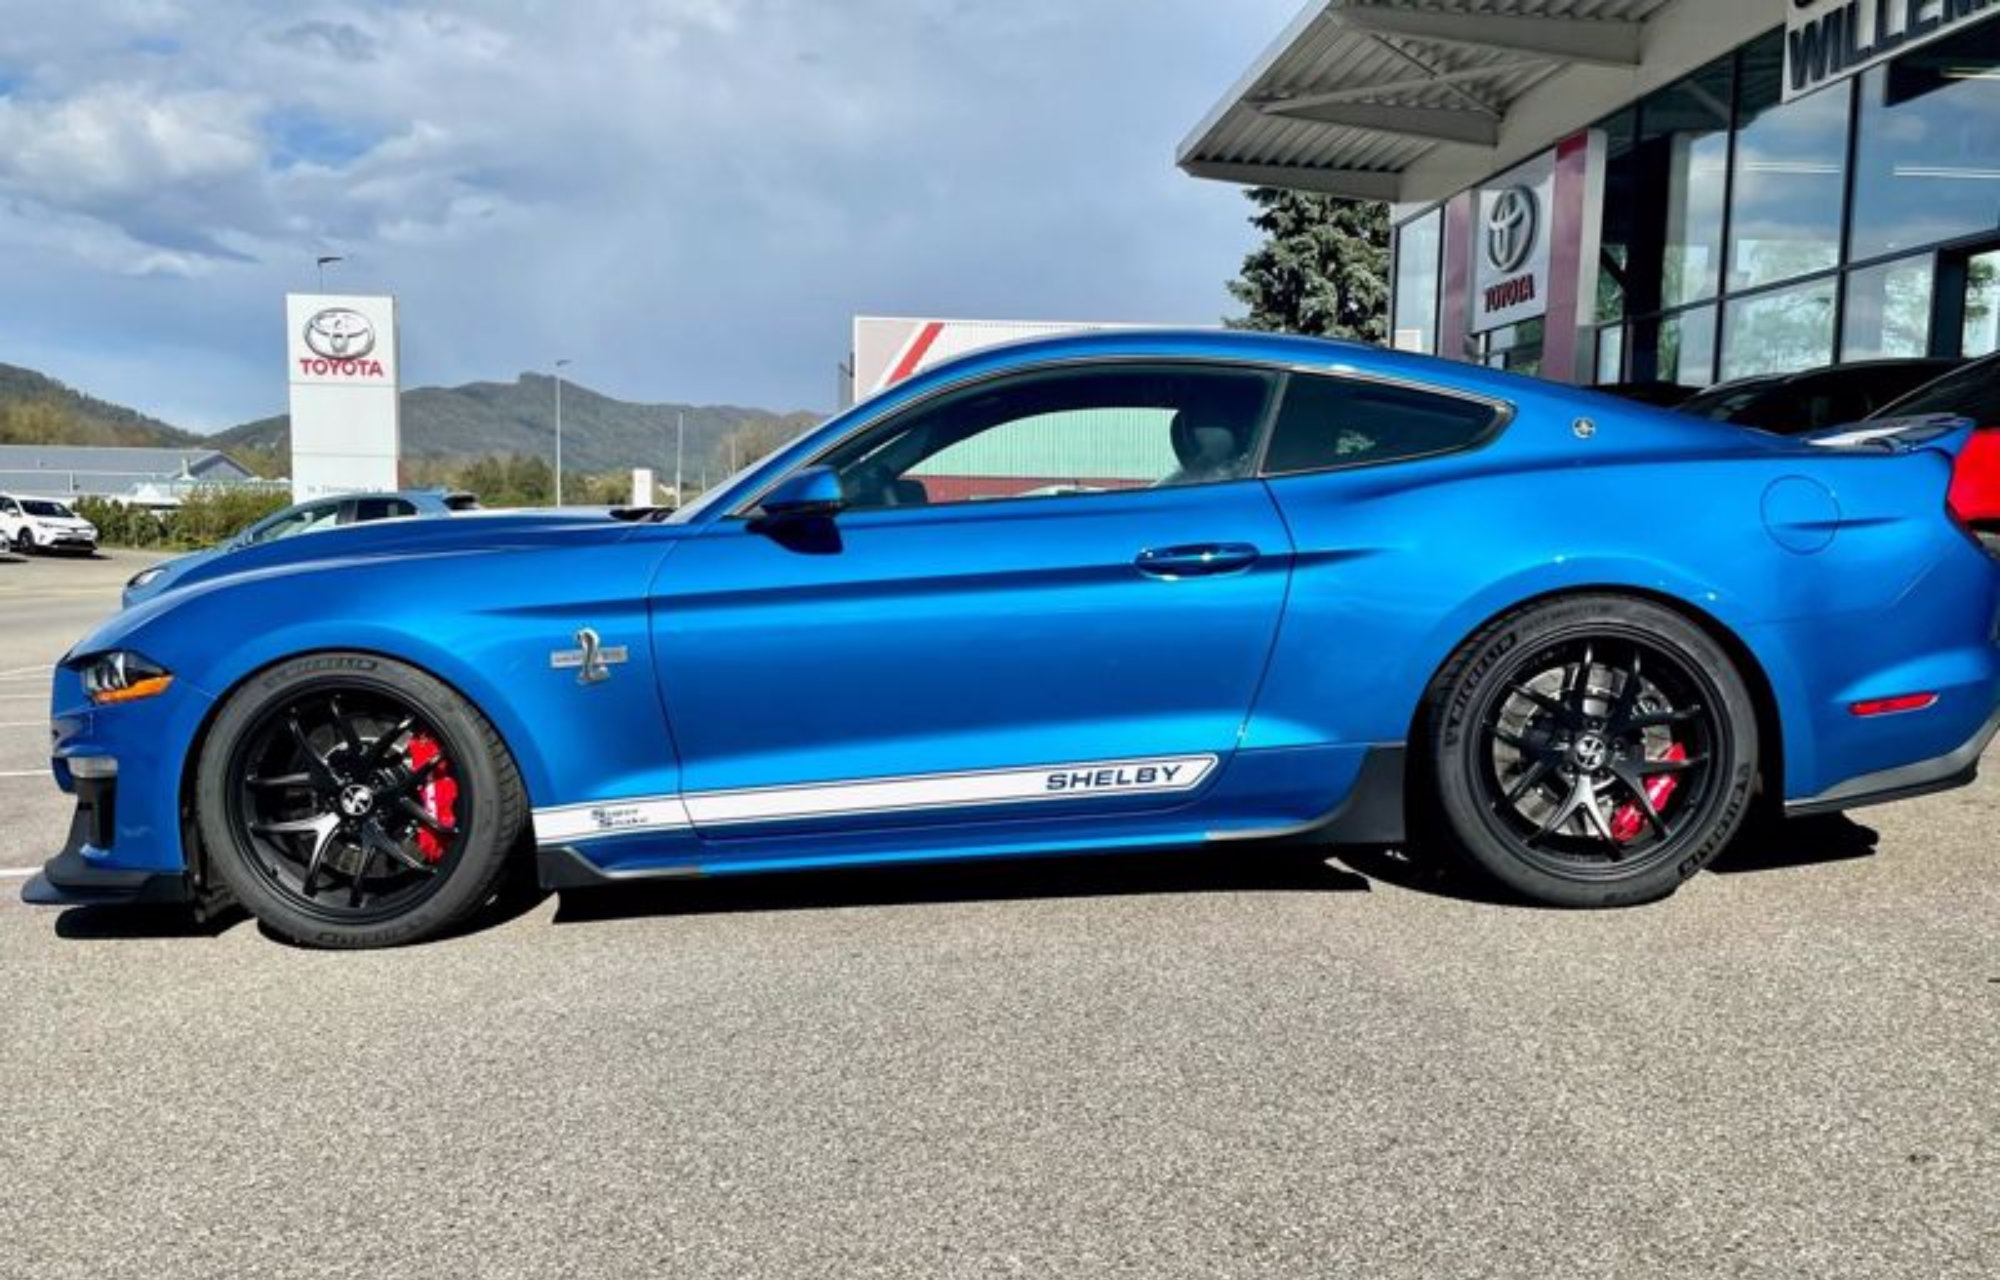 MUSTANG Shelby Supersnake